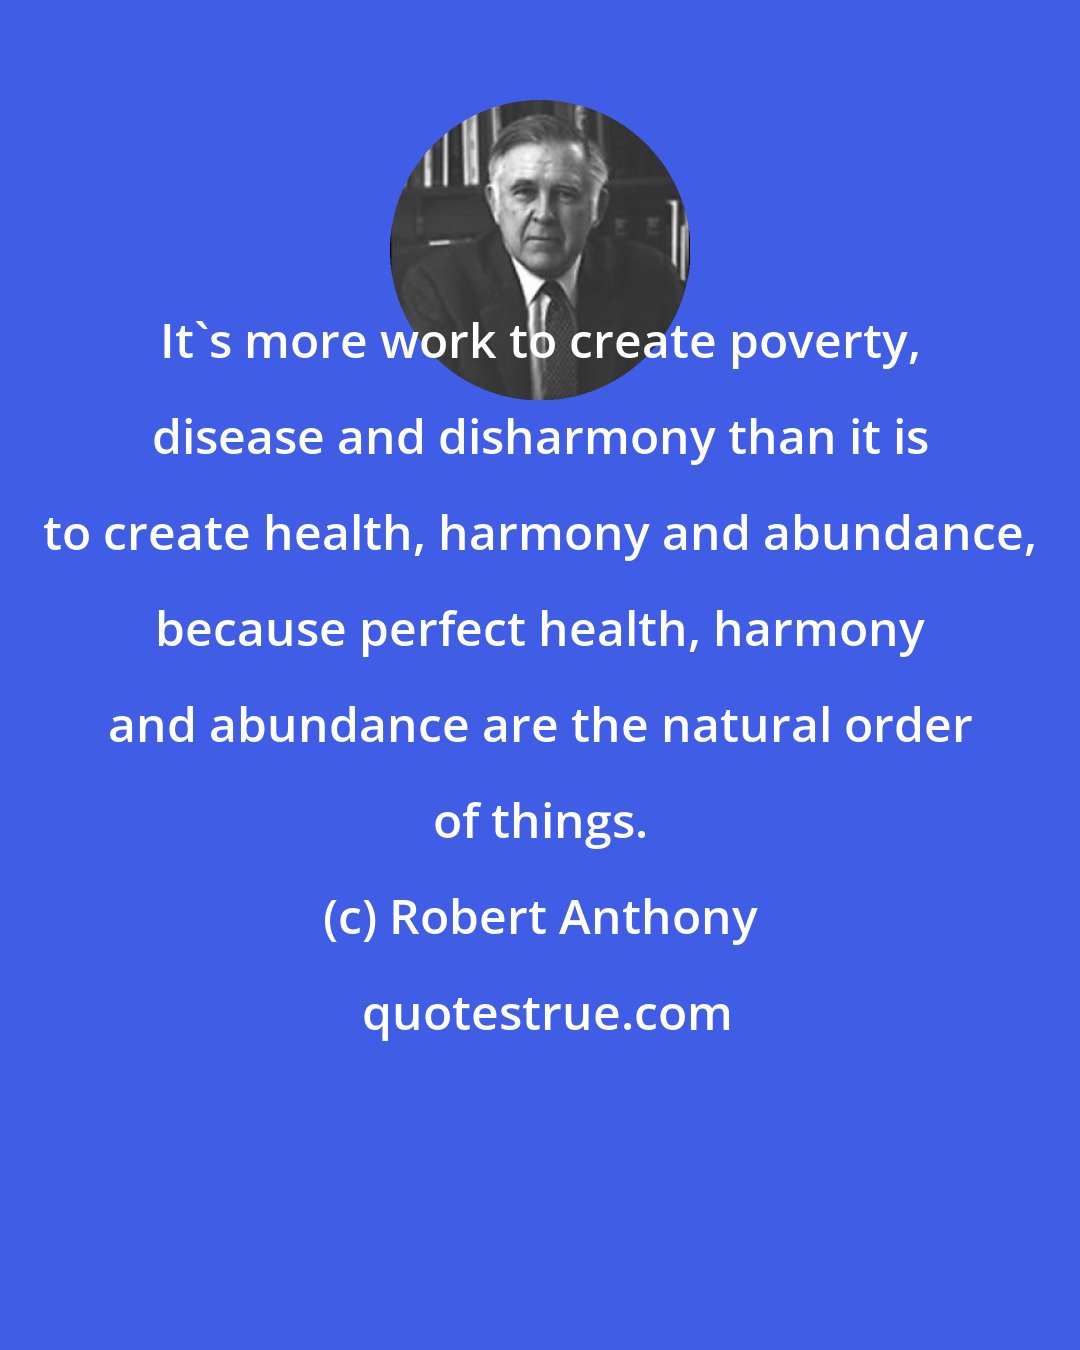 Robert Anthony: It's more work to create poverty, disease and disharmony than it is to create health, harmony and abundance, because perfect health, harmony and abundance are the natural order of things.